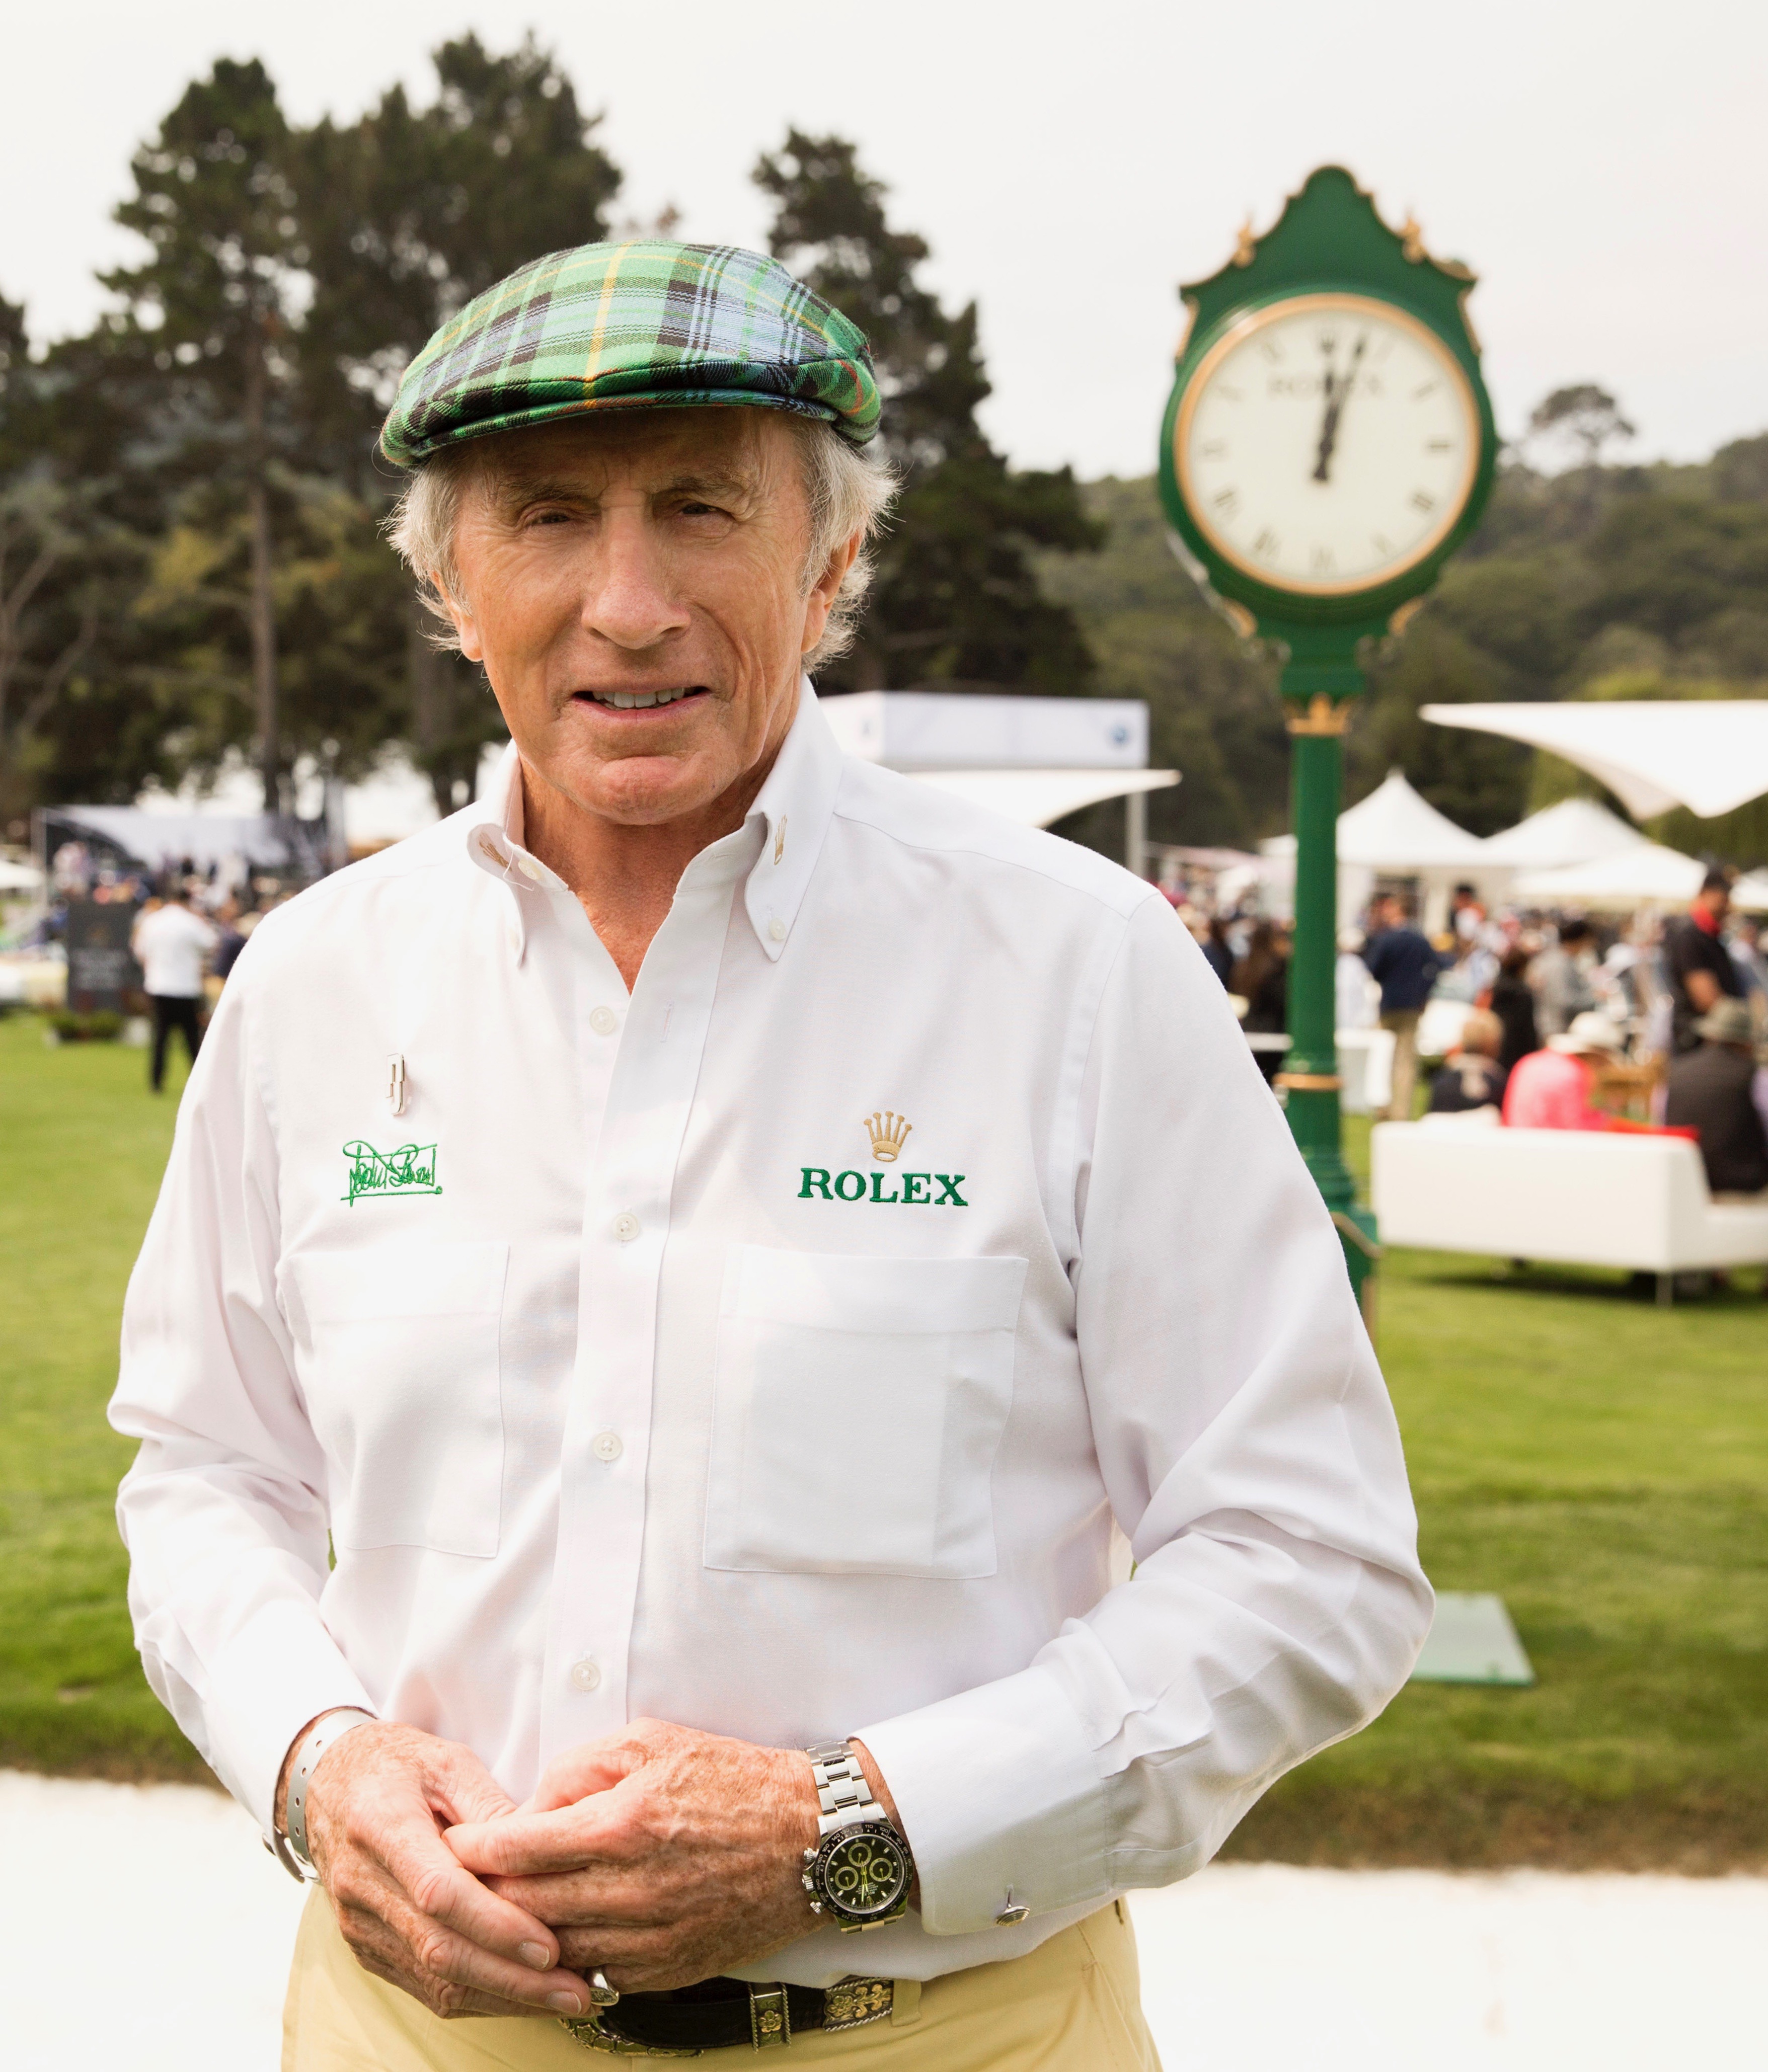 Jackie Stewart, Jackie Stewart gets double salute at 2019 Goodwood Festival of Speed, ClassicCars.com Journal